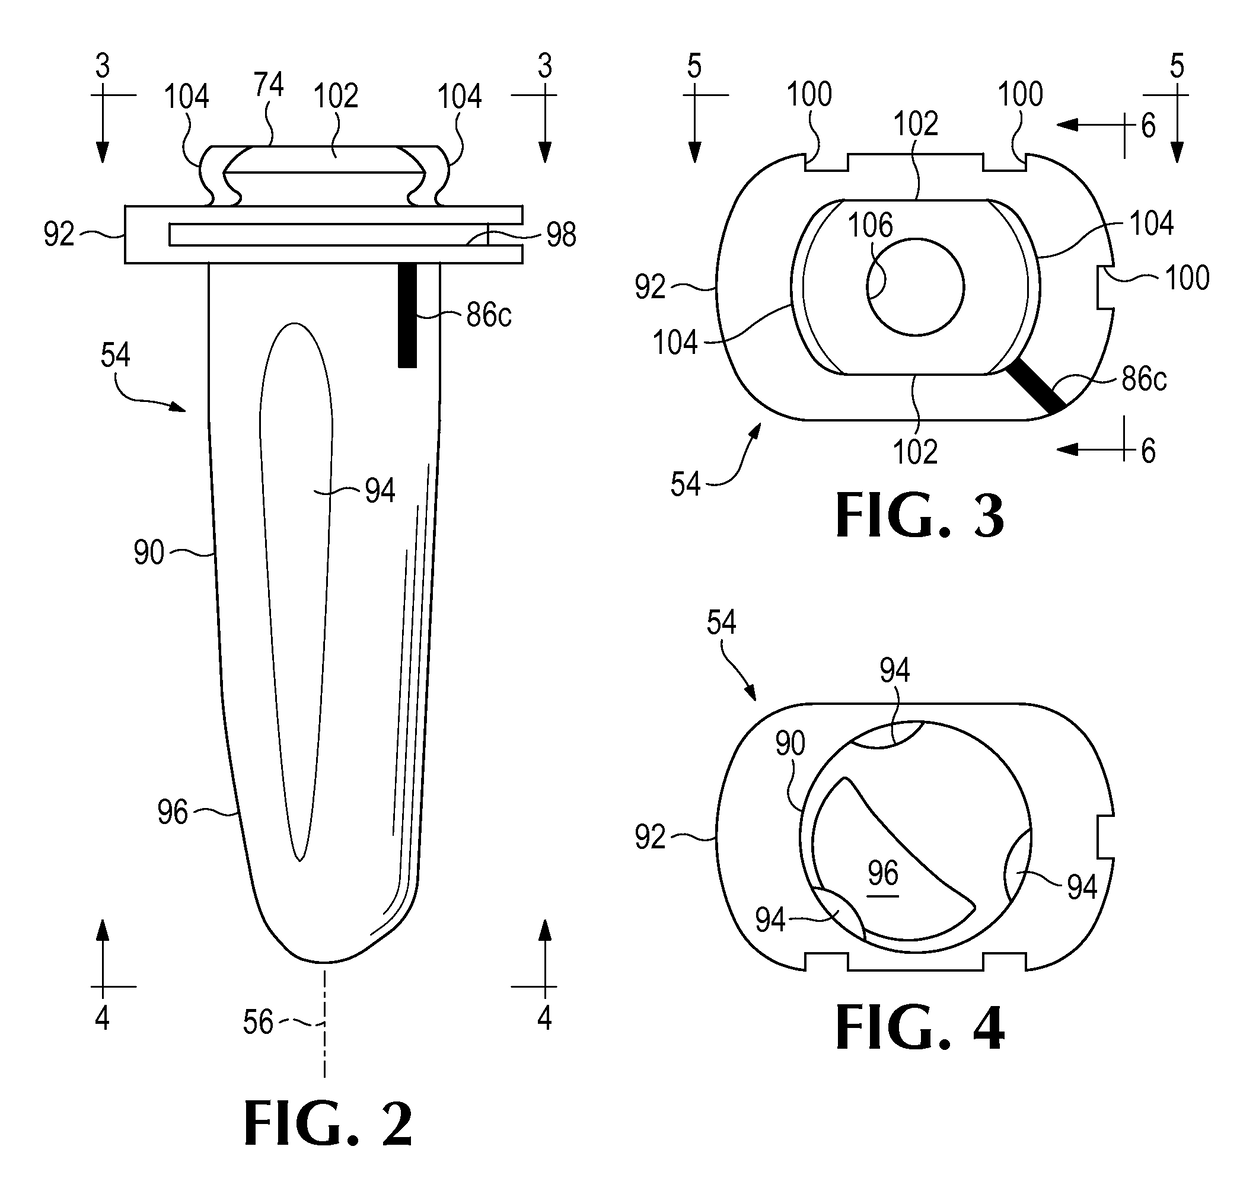 Radial head prosthesis with rotate-to-lock interface